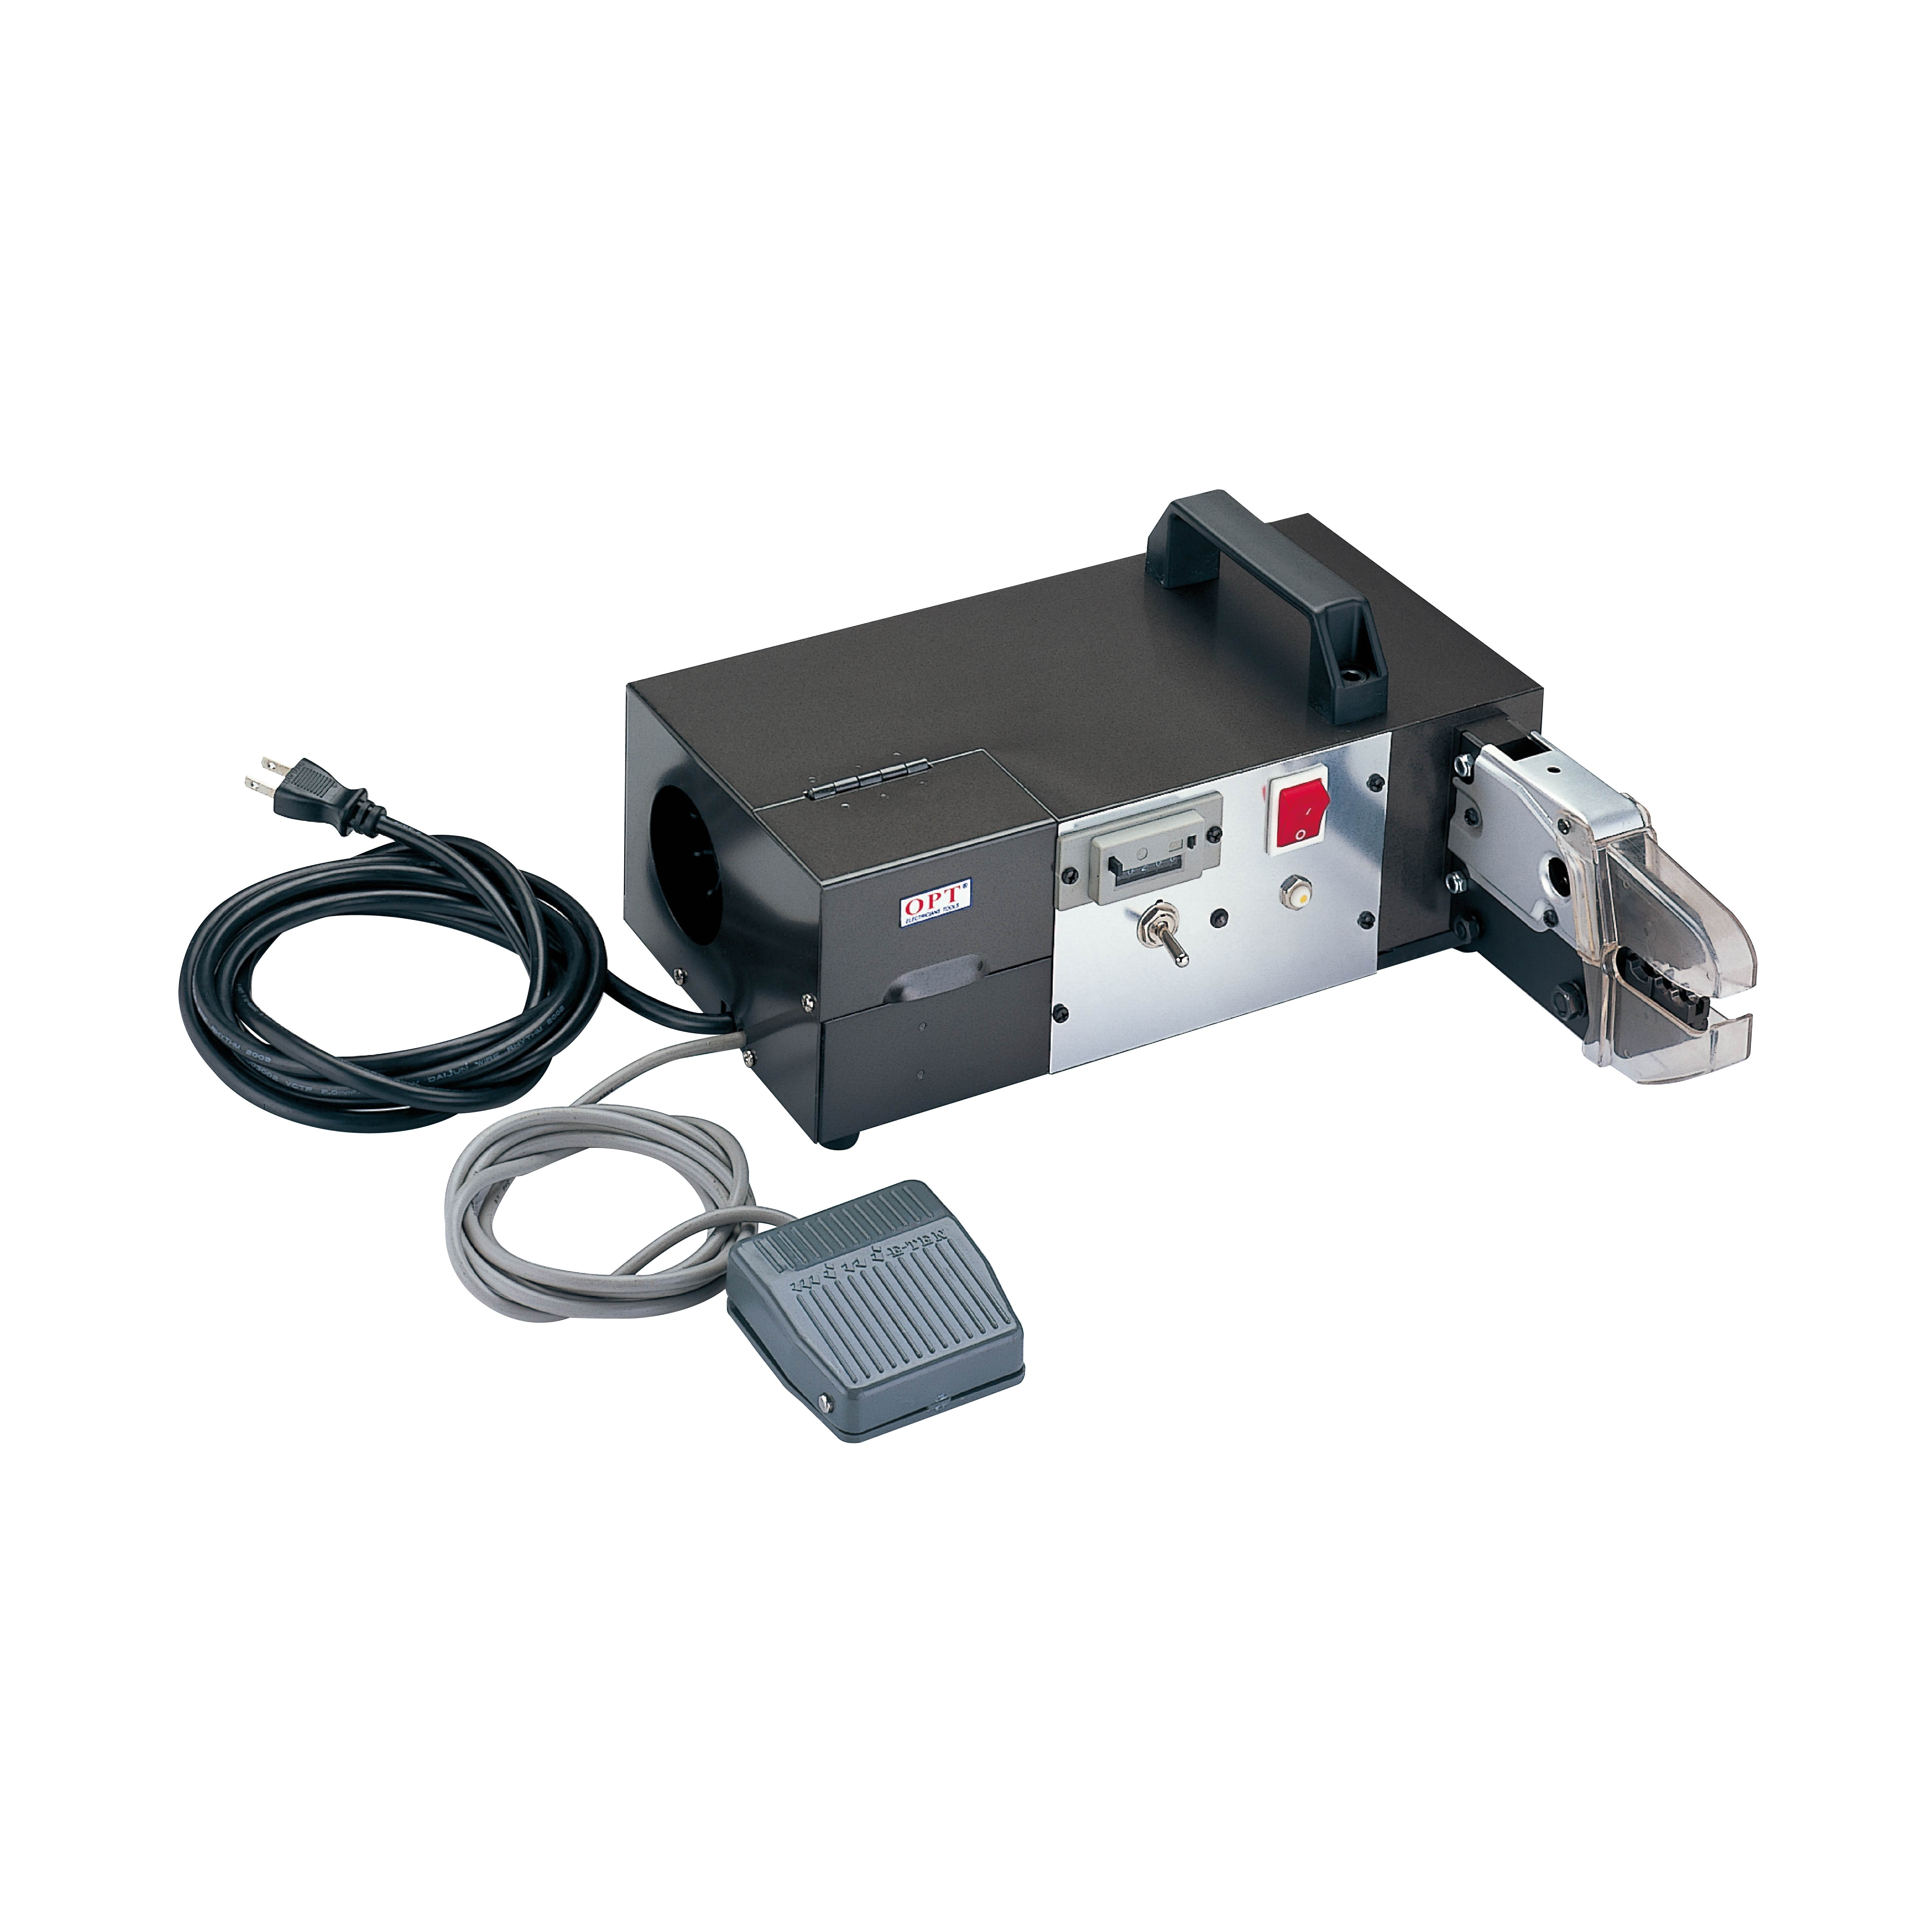 ELECTRICAL CRIMPING MACHINES